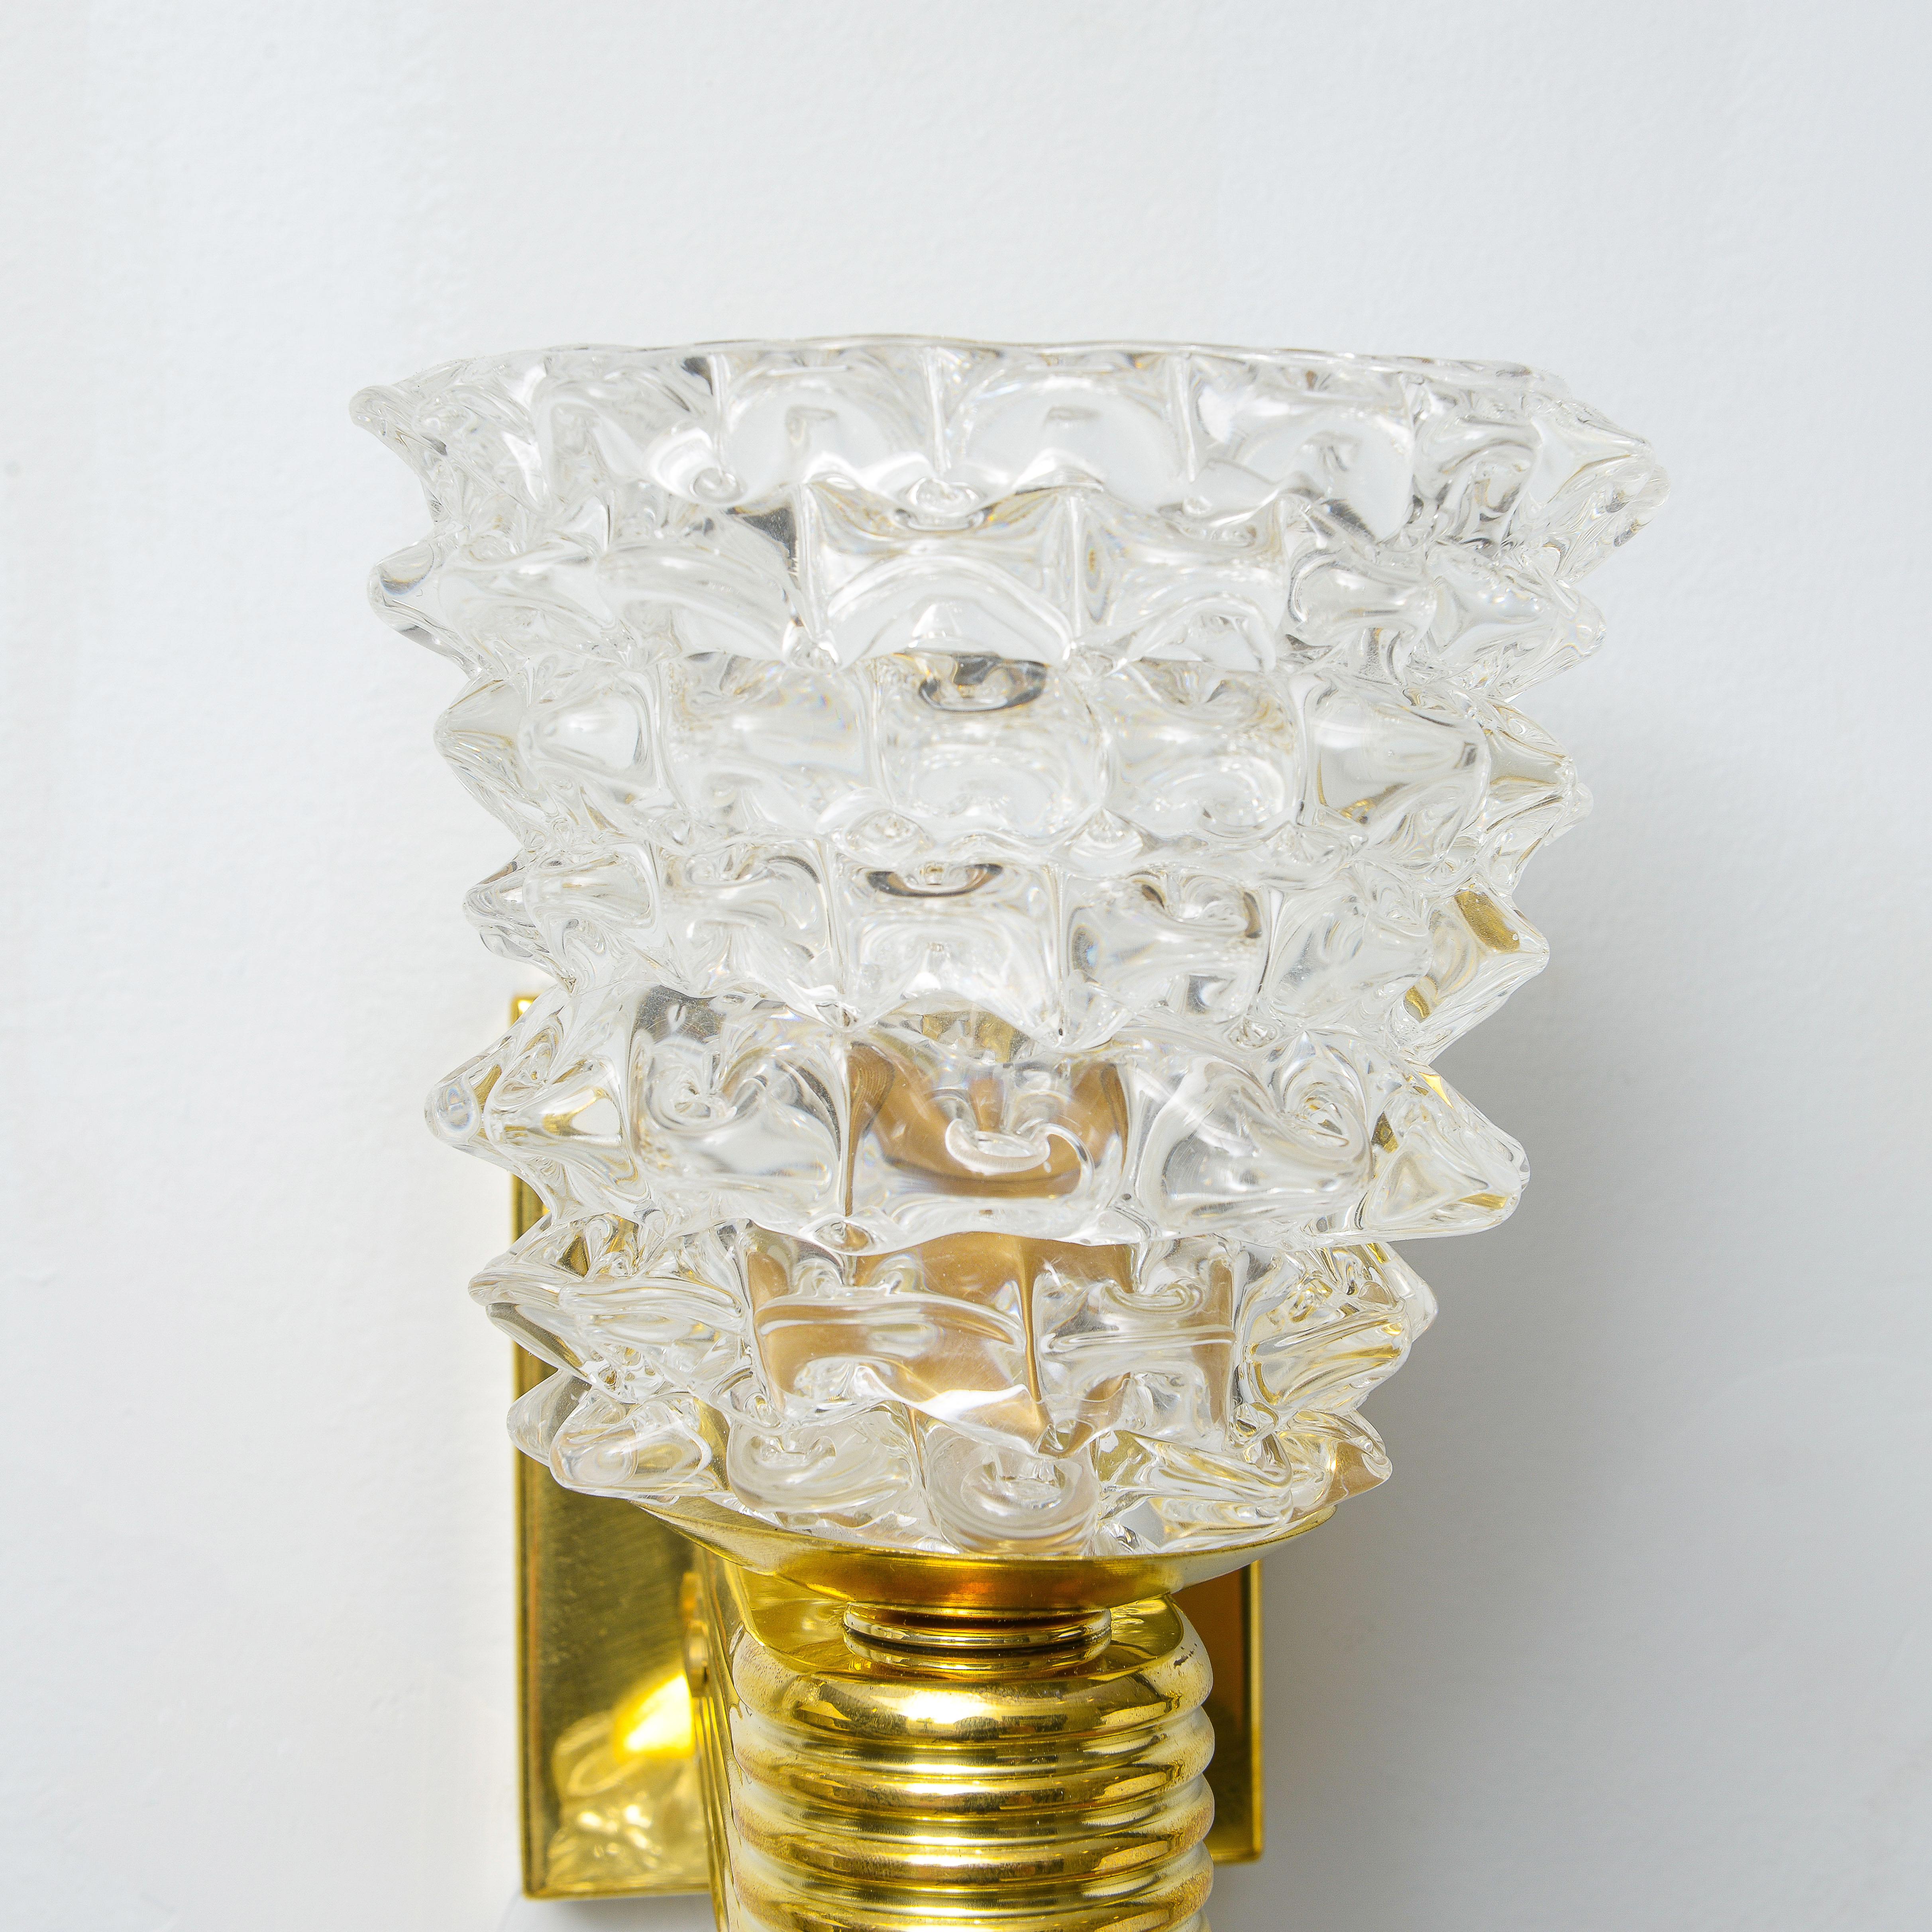 Contemporary Italian Rostrato Double-Arm Murano Glass and Brass Sconces In Excellent Condition For Sale In New York, NY